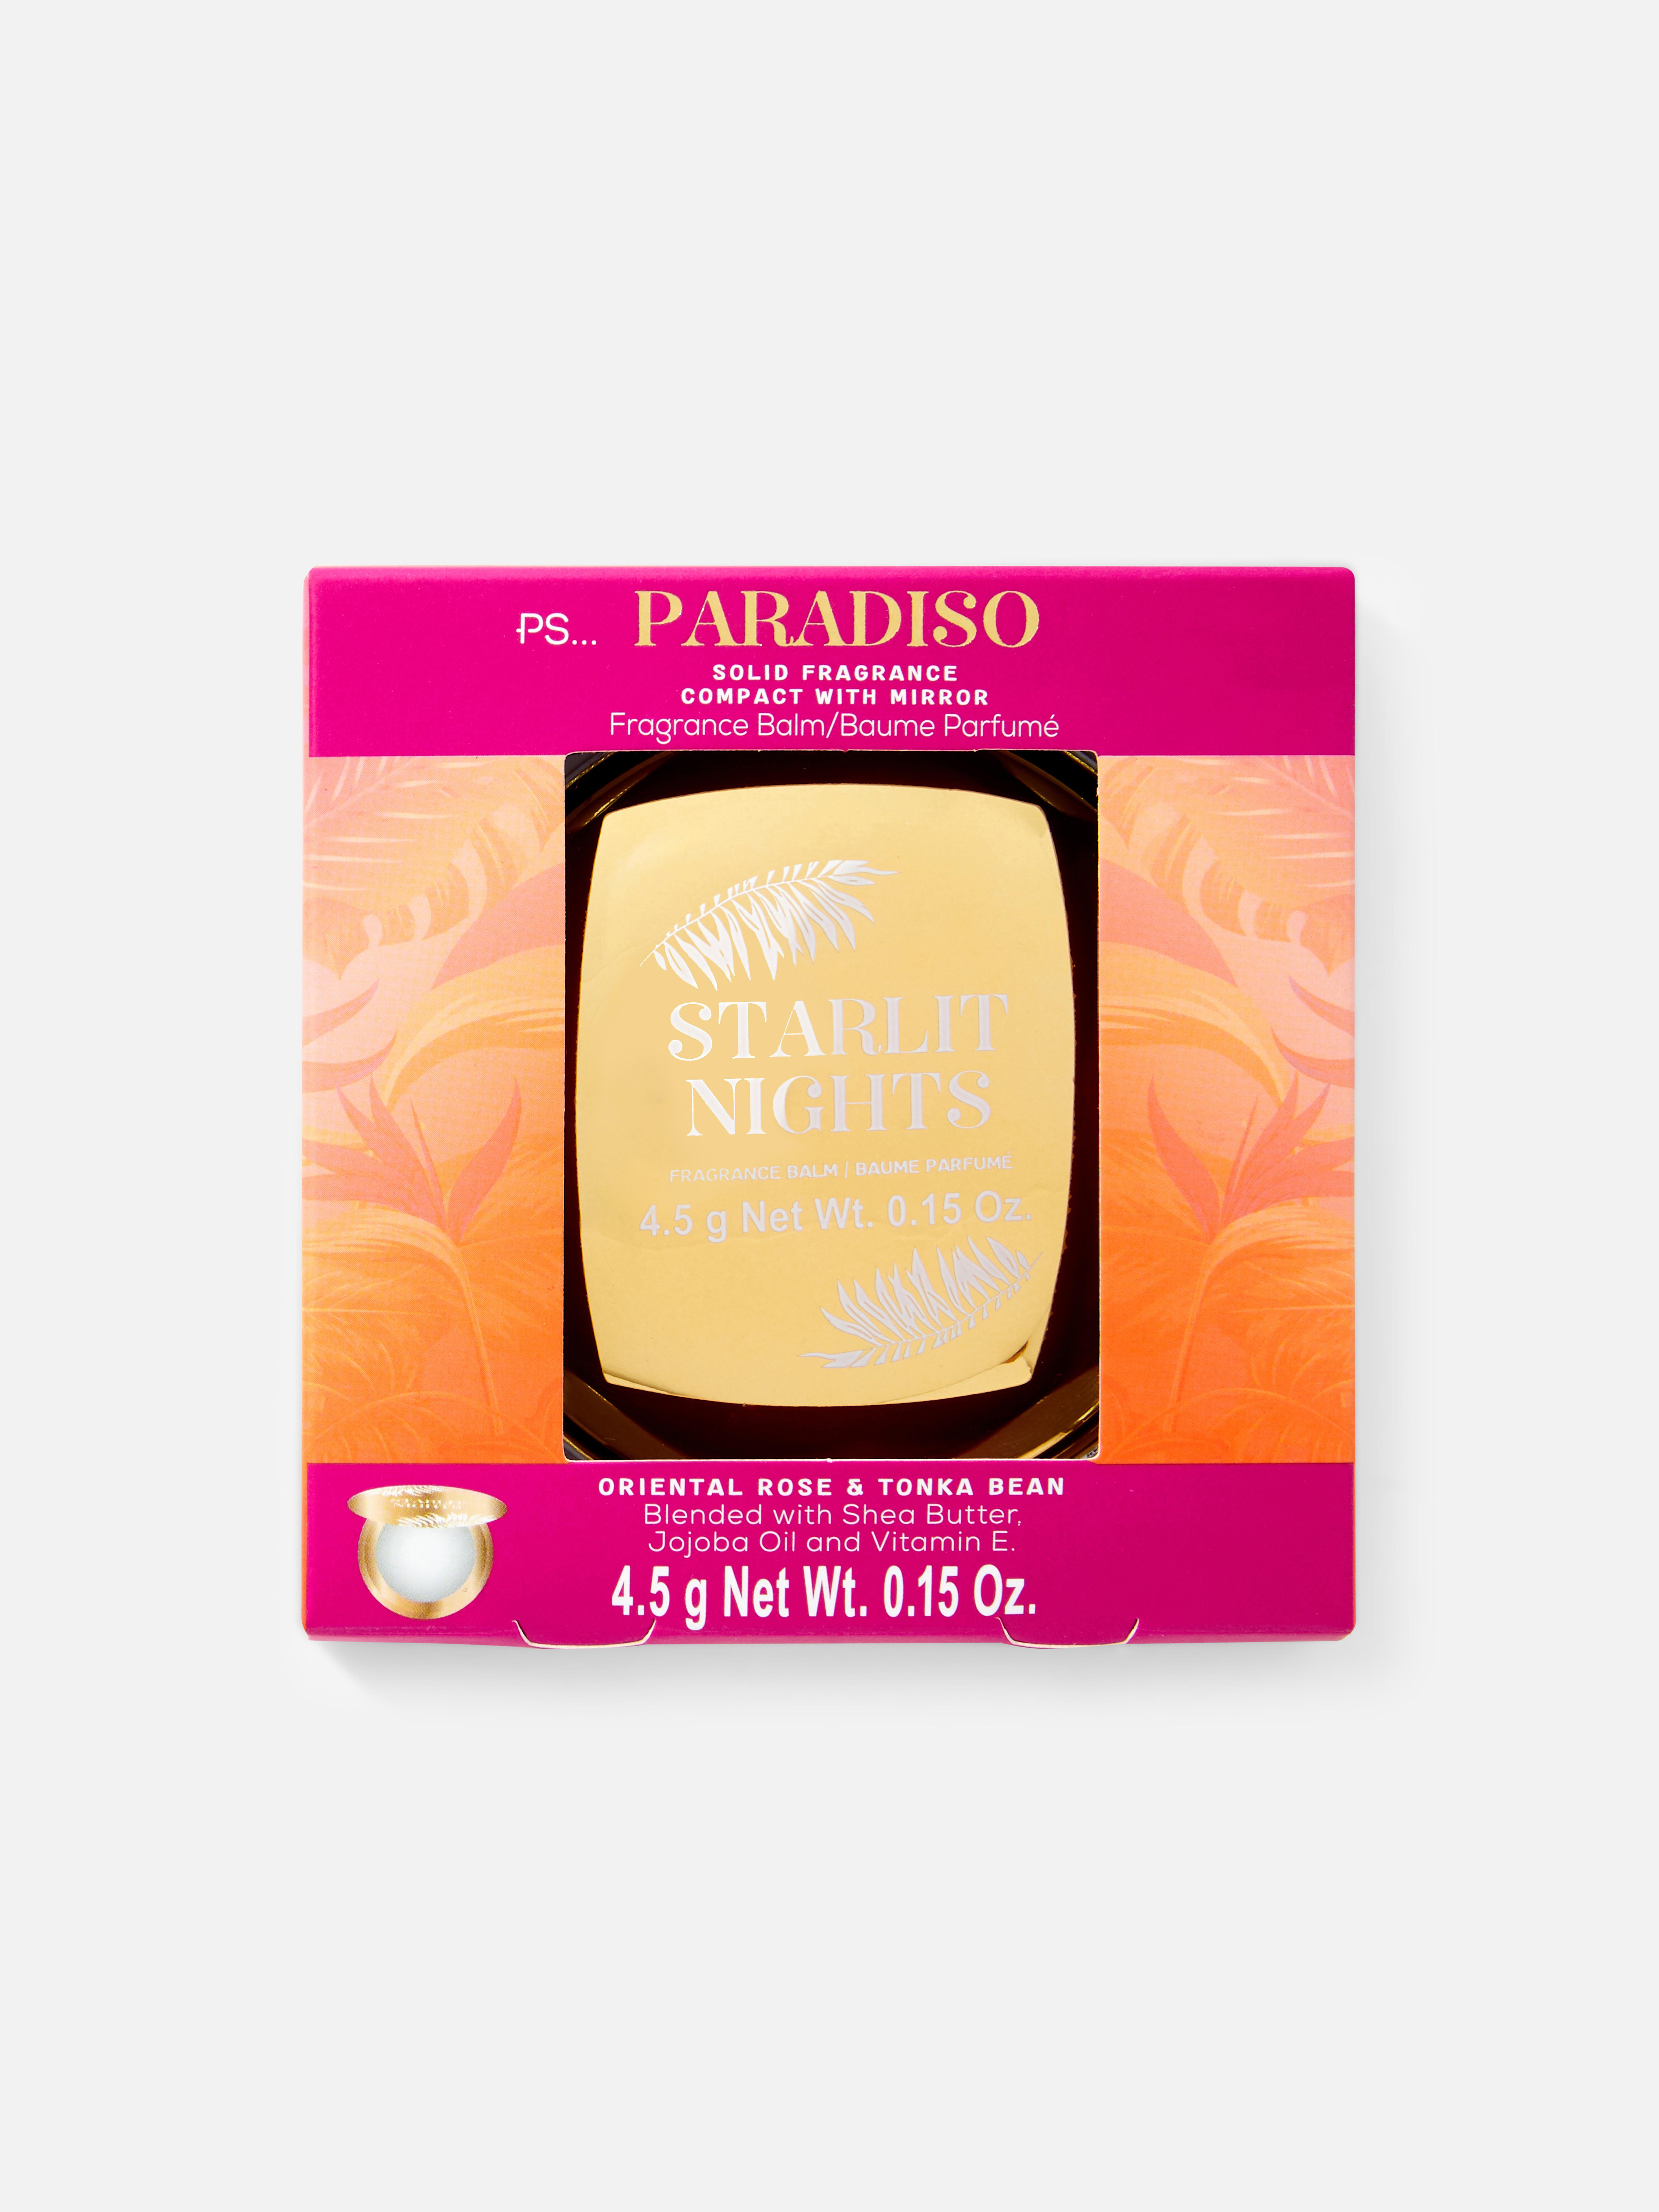 PS Paradiso Starlit Nights Solid Fragrance